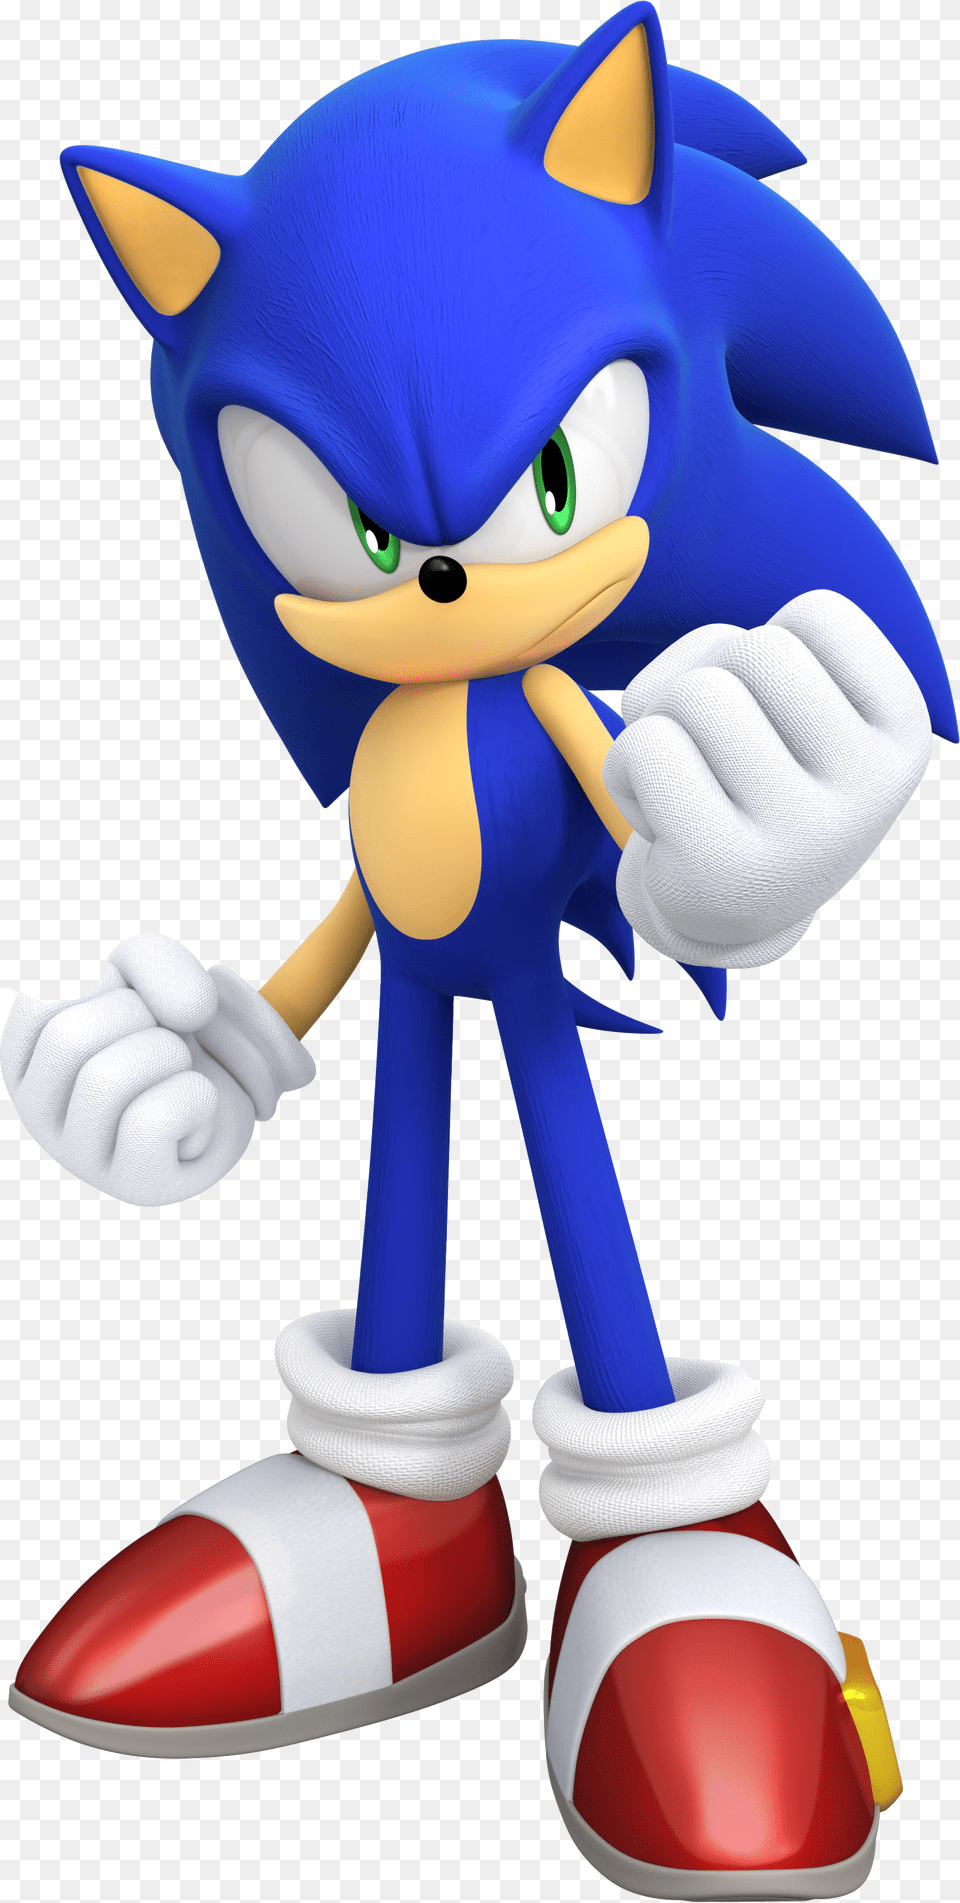 Sonic The Hedgehog Image Sonic The Hedgehog, Toy Free Png Download